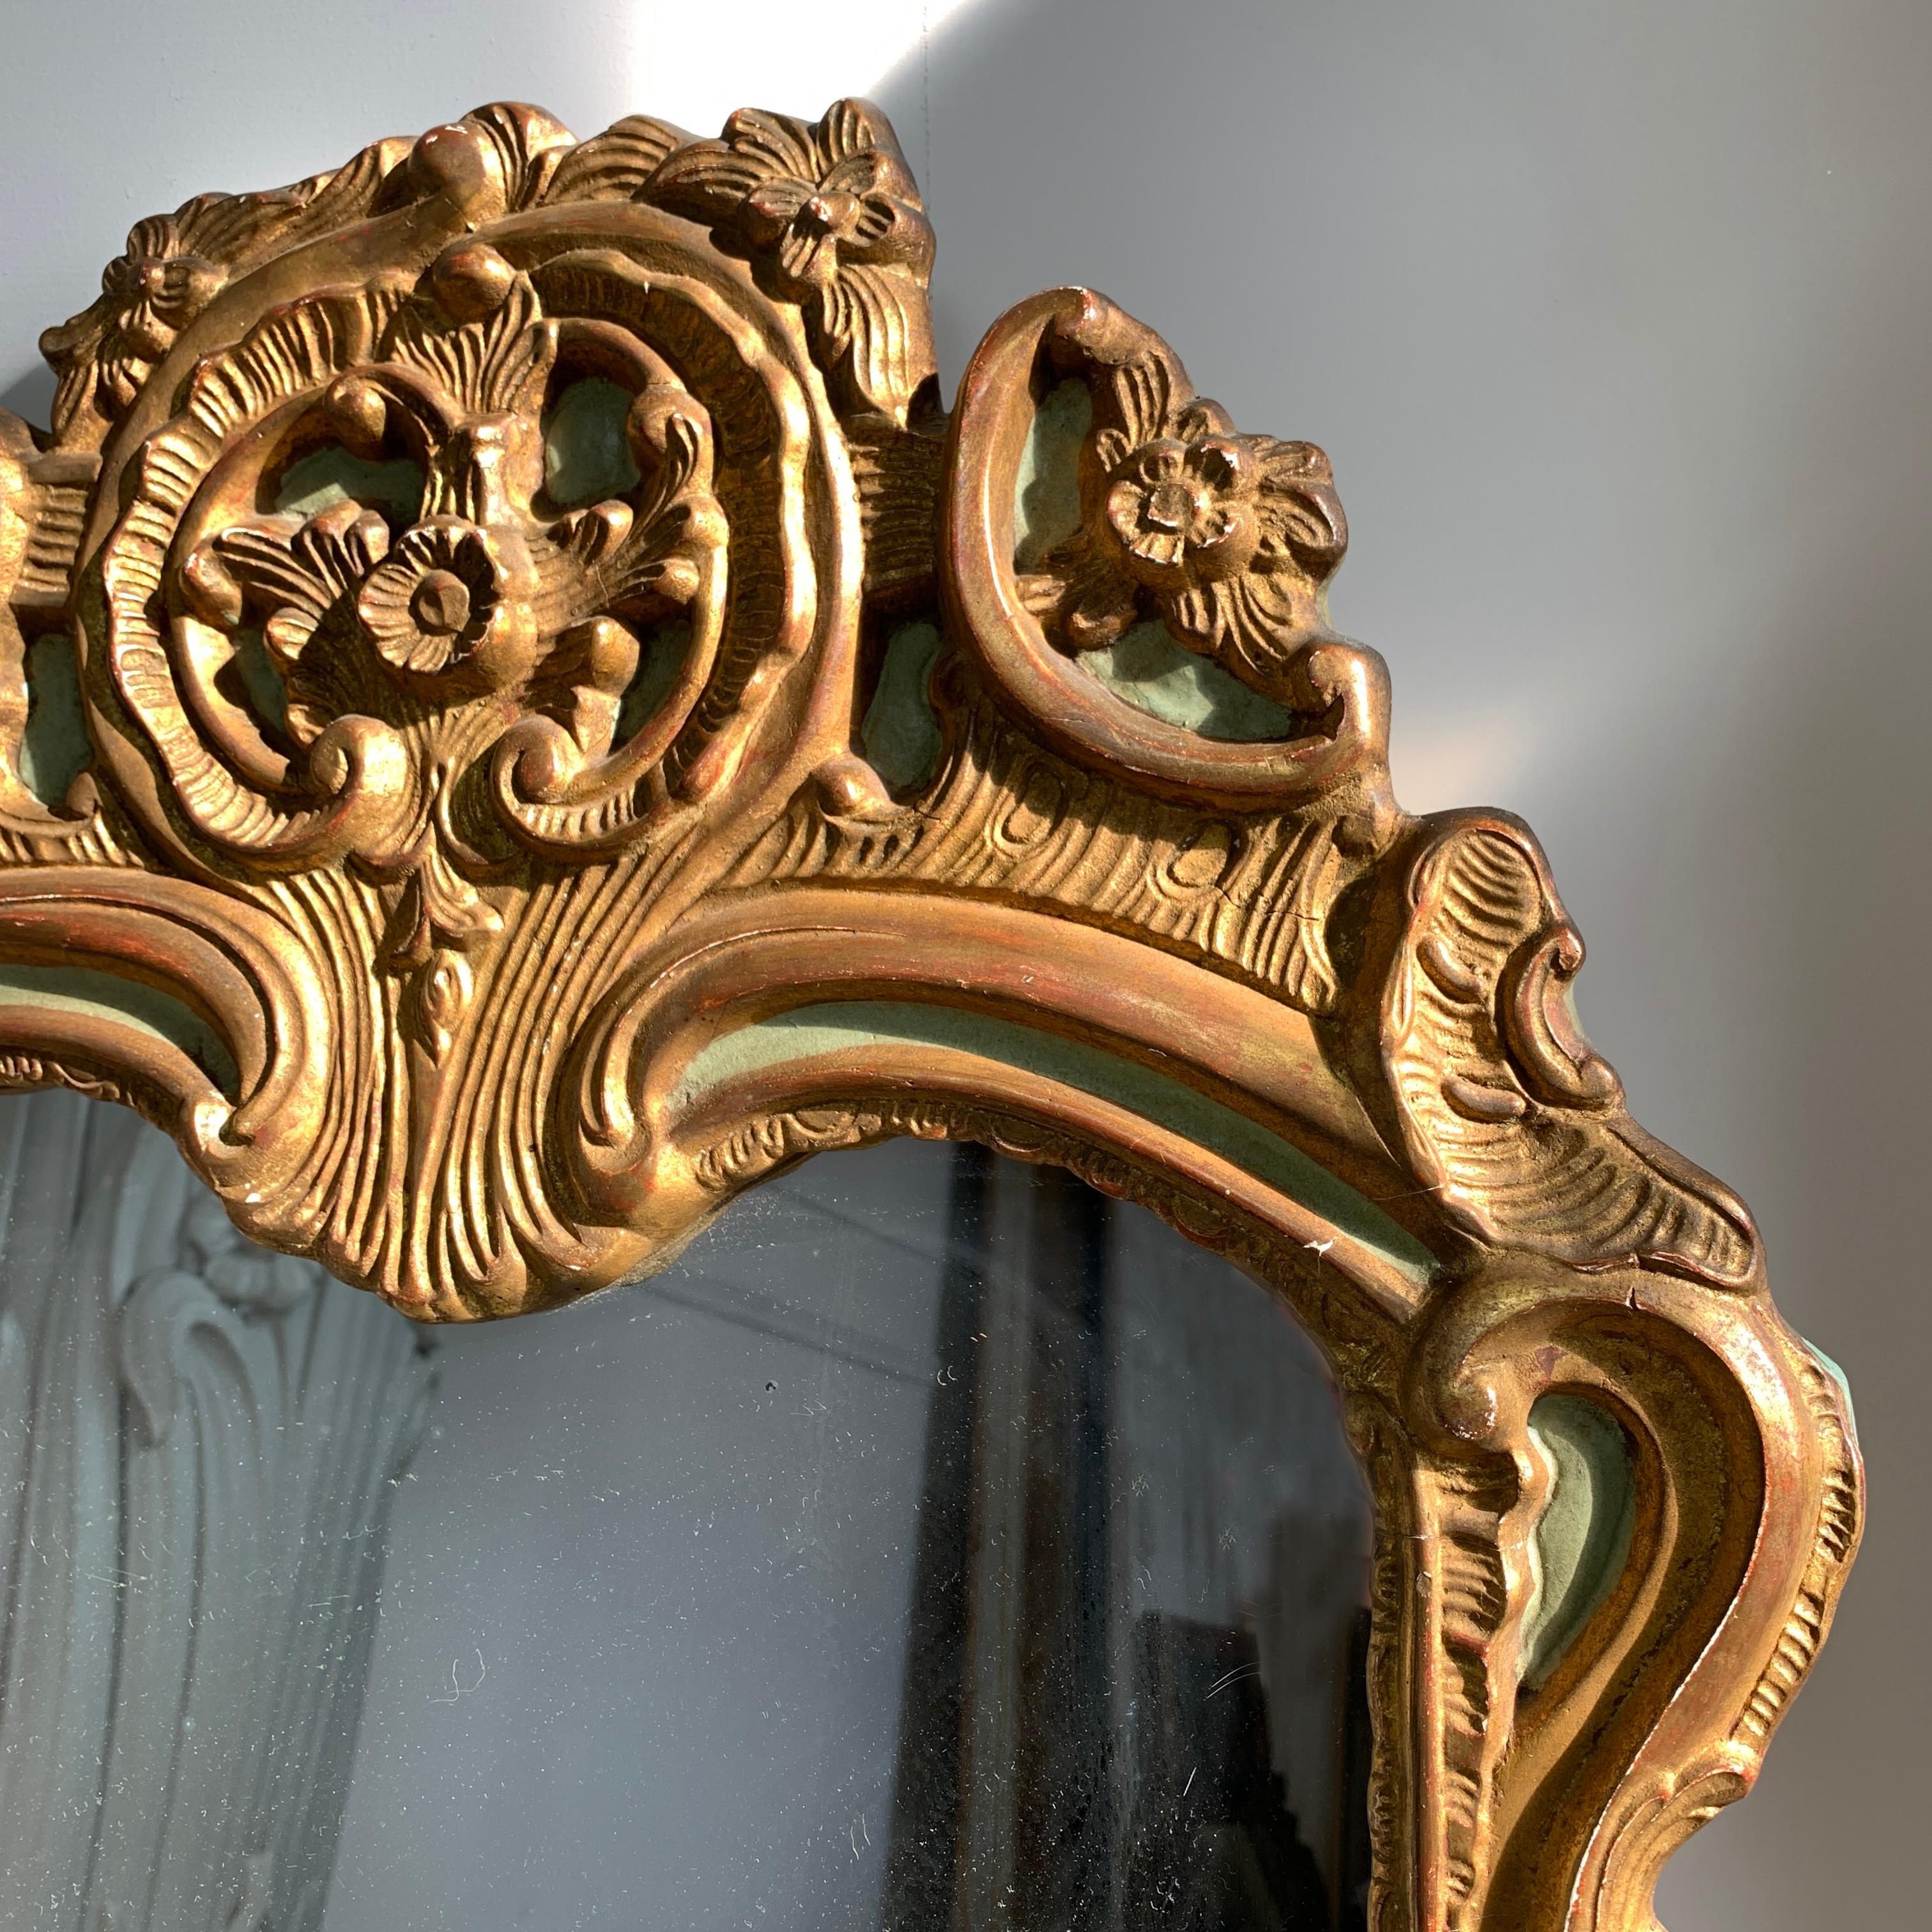 Beautiful late 19th century mirror.
Deep carved frame, heavy wood, possibly walnut, with gold and duck egg green finish.
Probably Italian, with later glass.
The back bears the remains of old French newspaper, so it has travelled north in the last